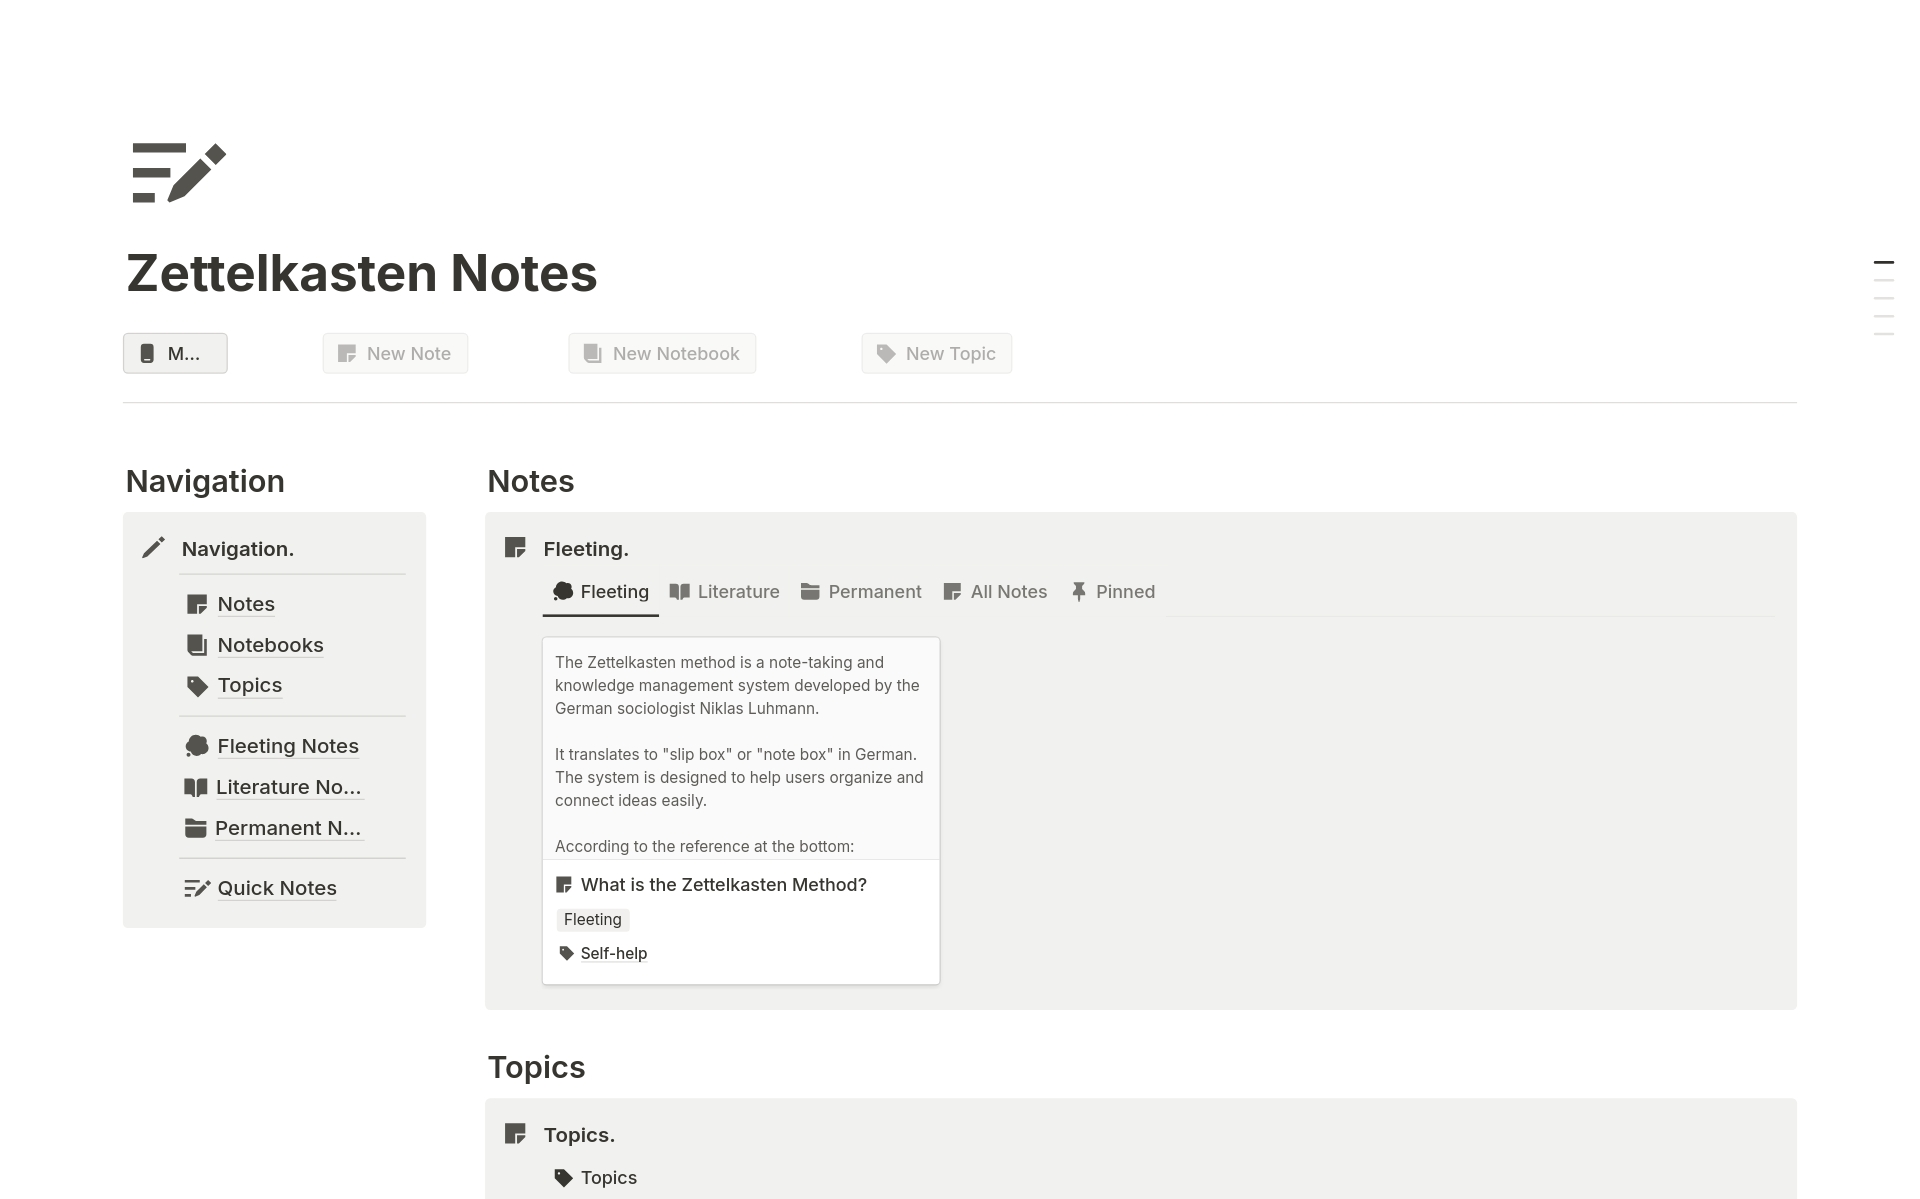 Zettelkasten Notes is an easy-to-use Notion template that uses the Zettelkasten method to help you organize your notes and build a knowledge base. This system saves you time, energy, and trouble by giving you a deadly simple and streamlined interface to jot down your notes.